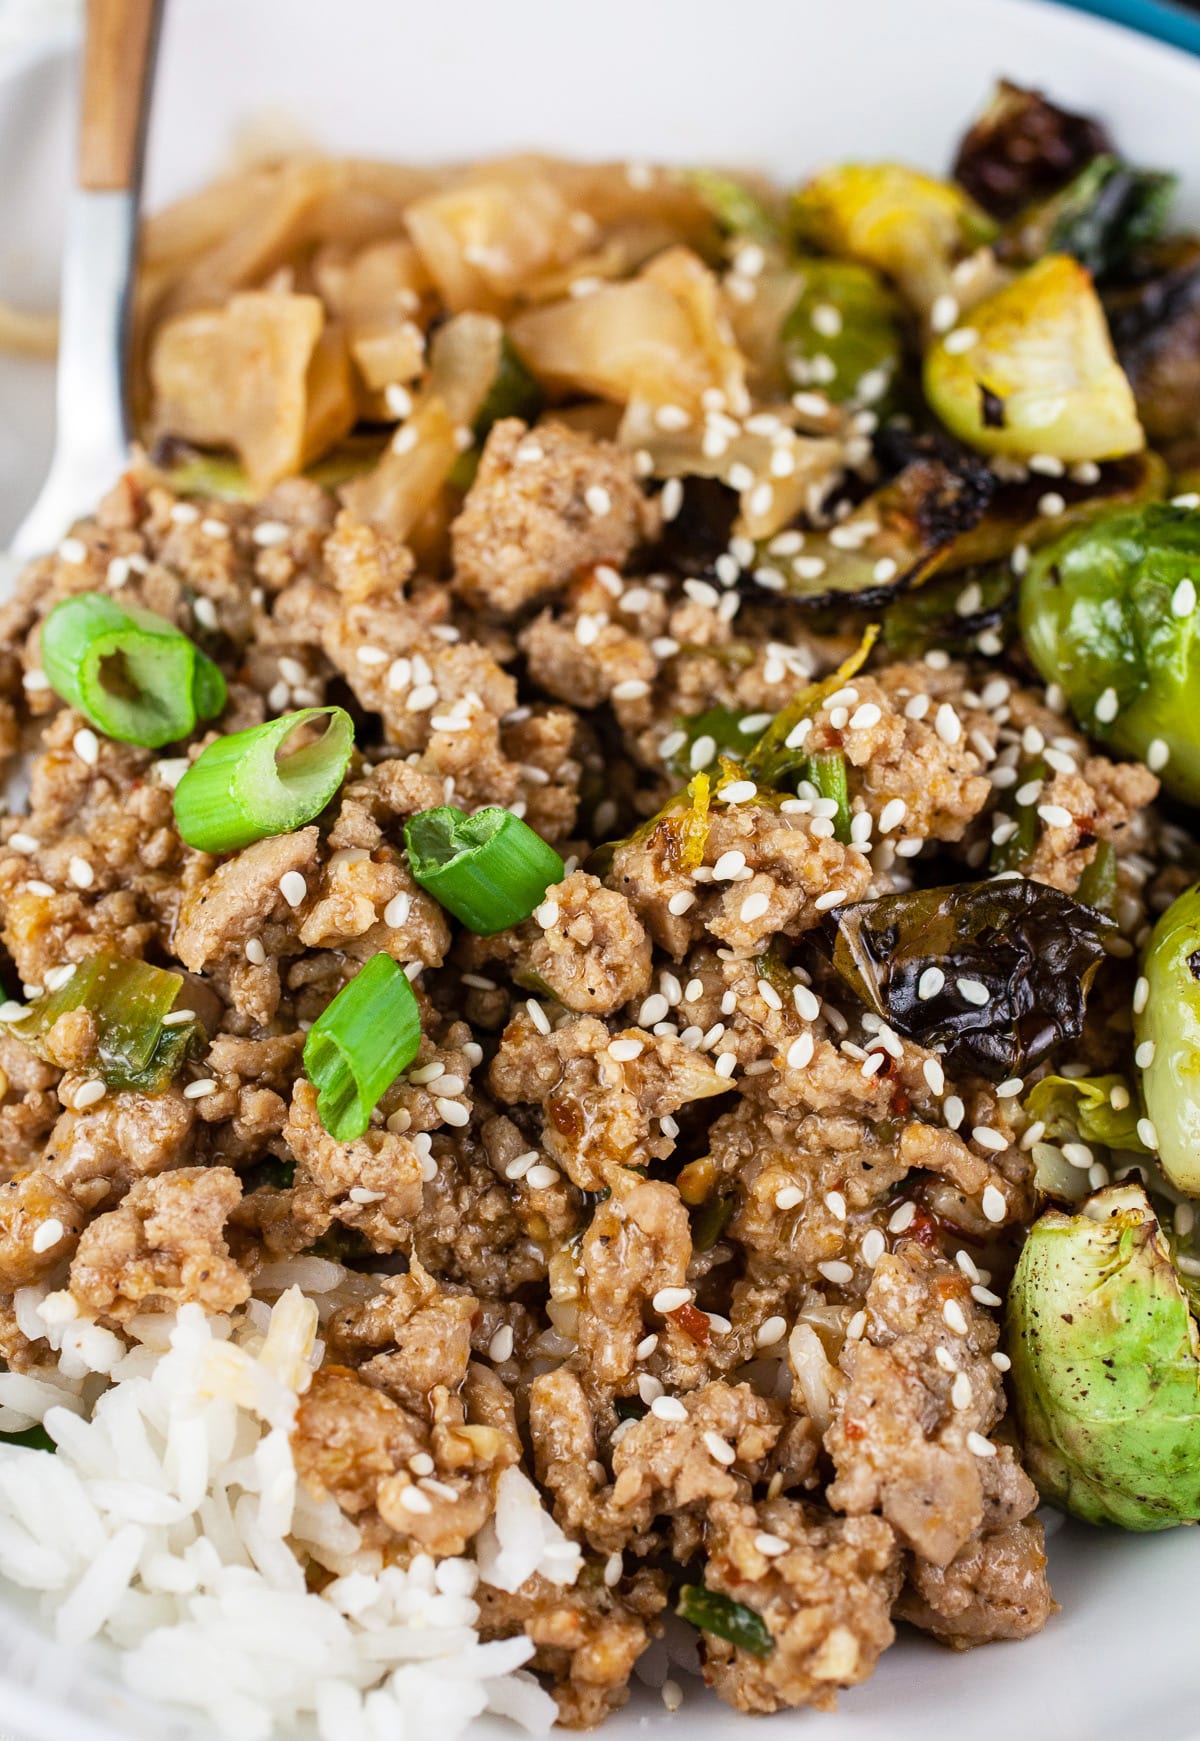 Korean ground turkey bowls with rice, kimchi, and Brussels sprouts.